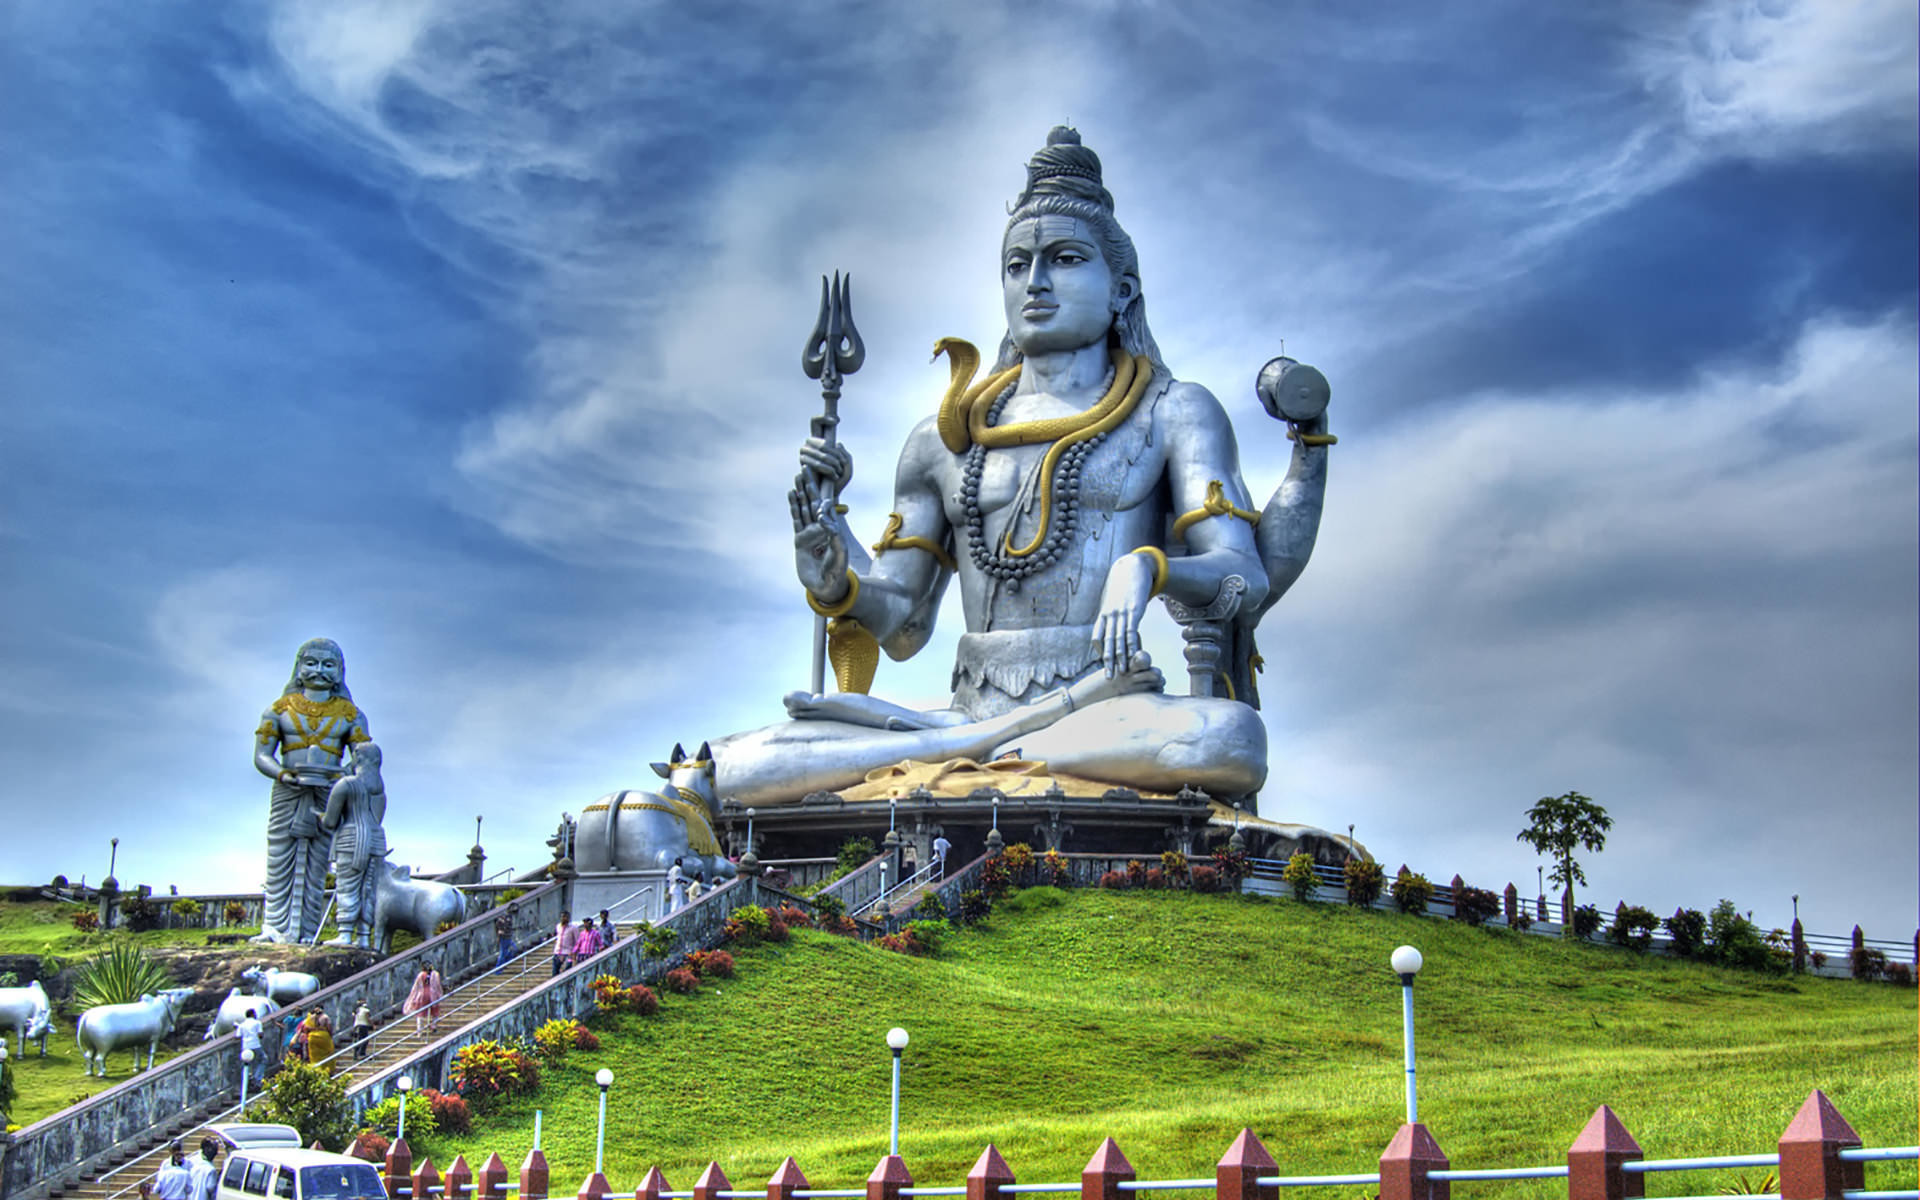 Full Hd Lord Shiva Family Images Wallpapers